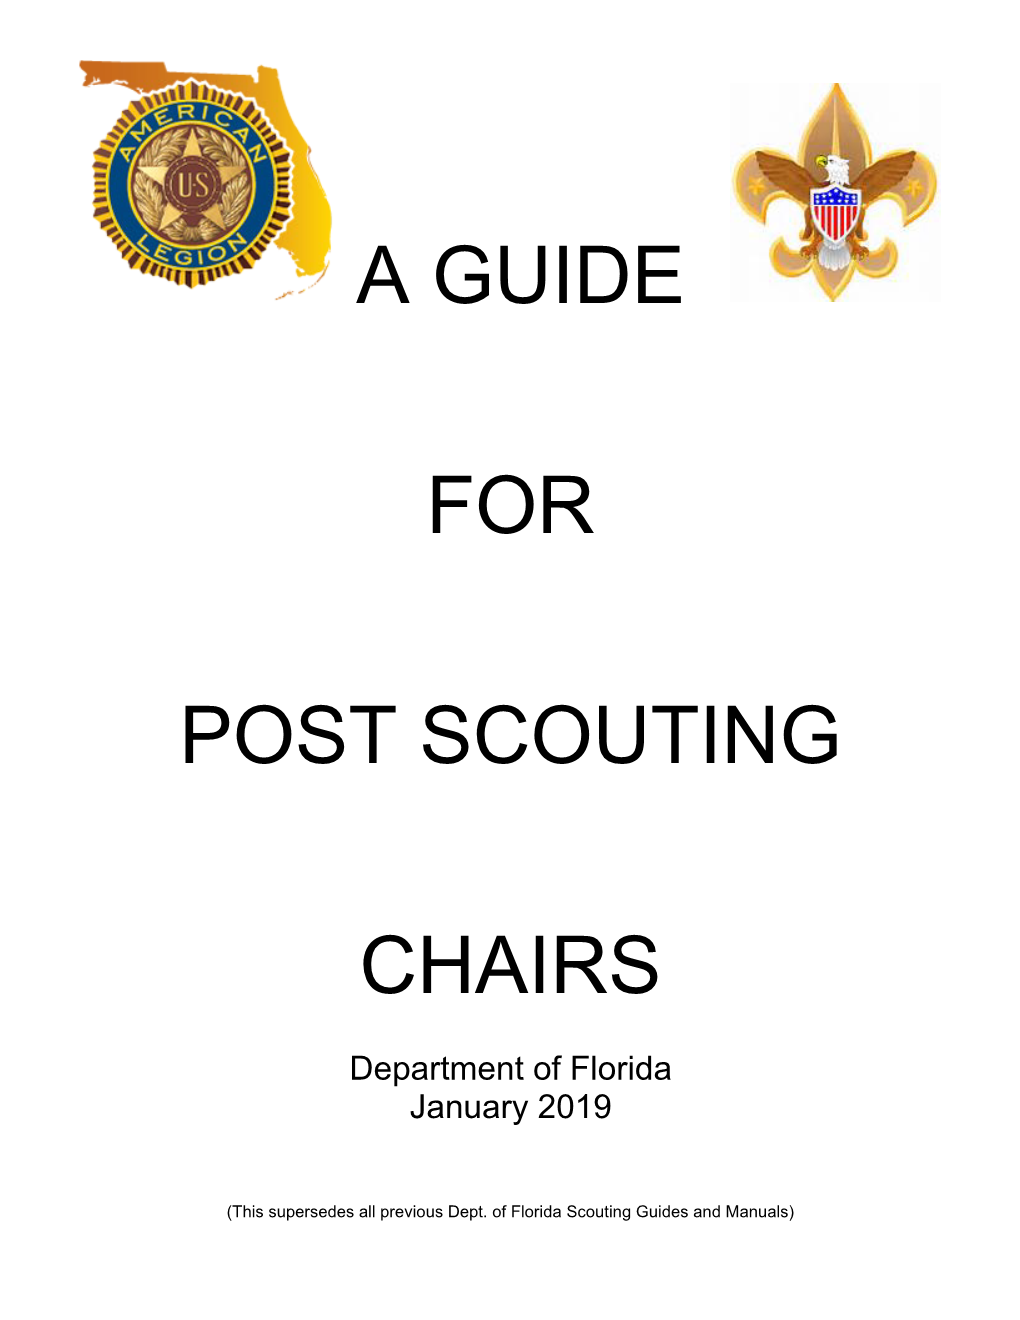 A Guide for Post Scouting Chairs